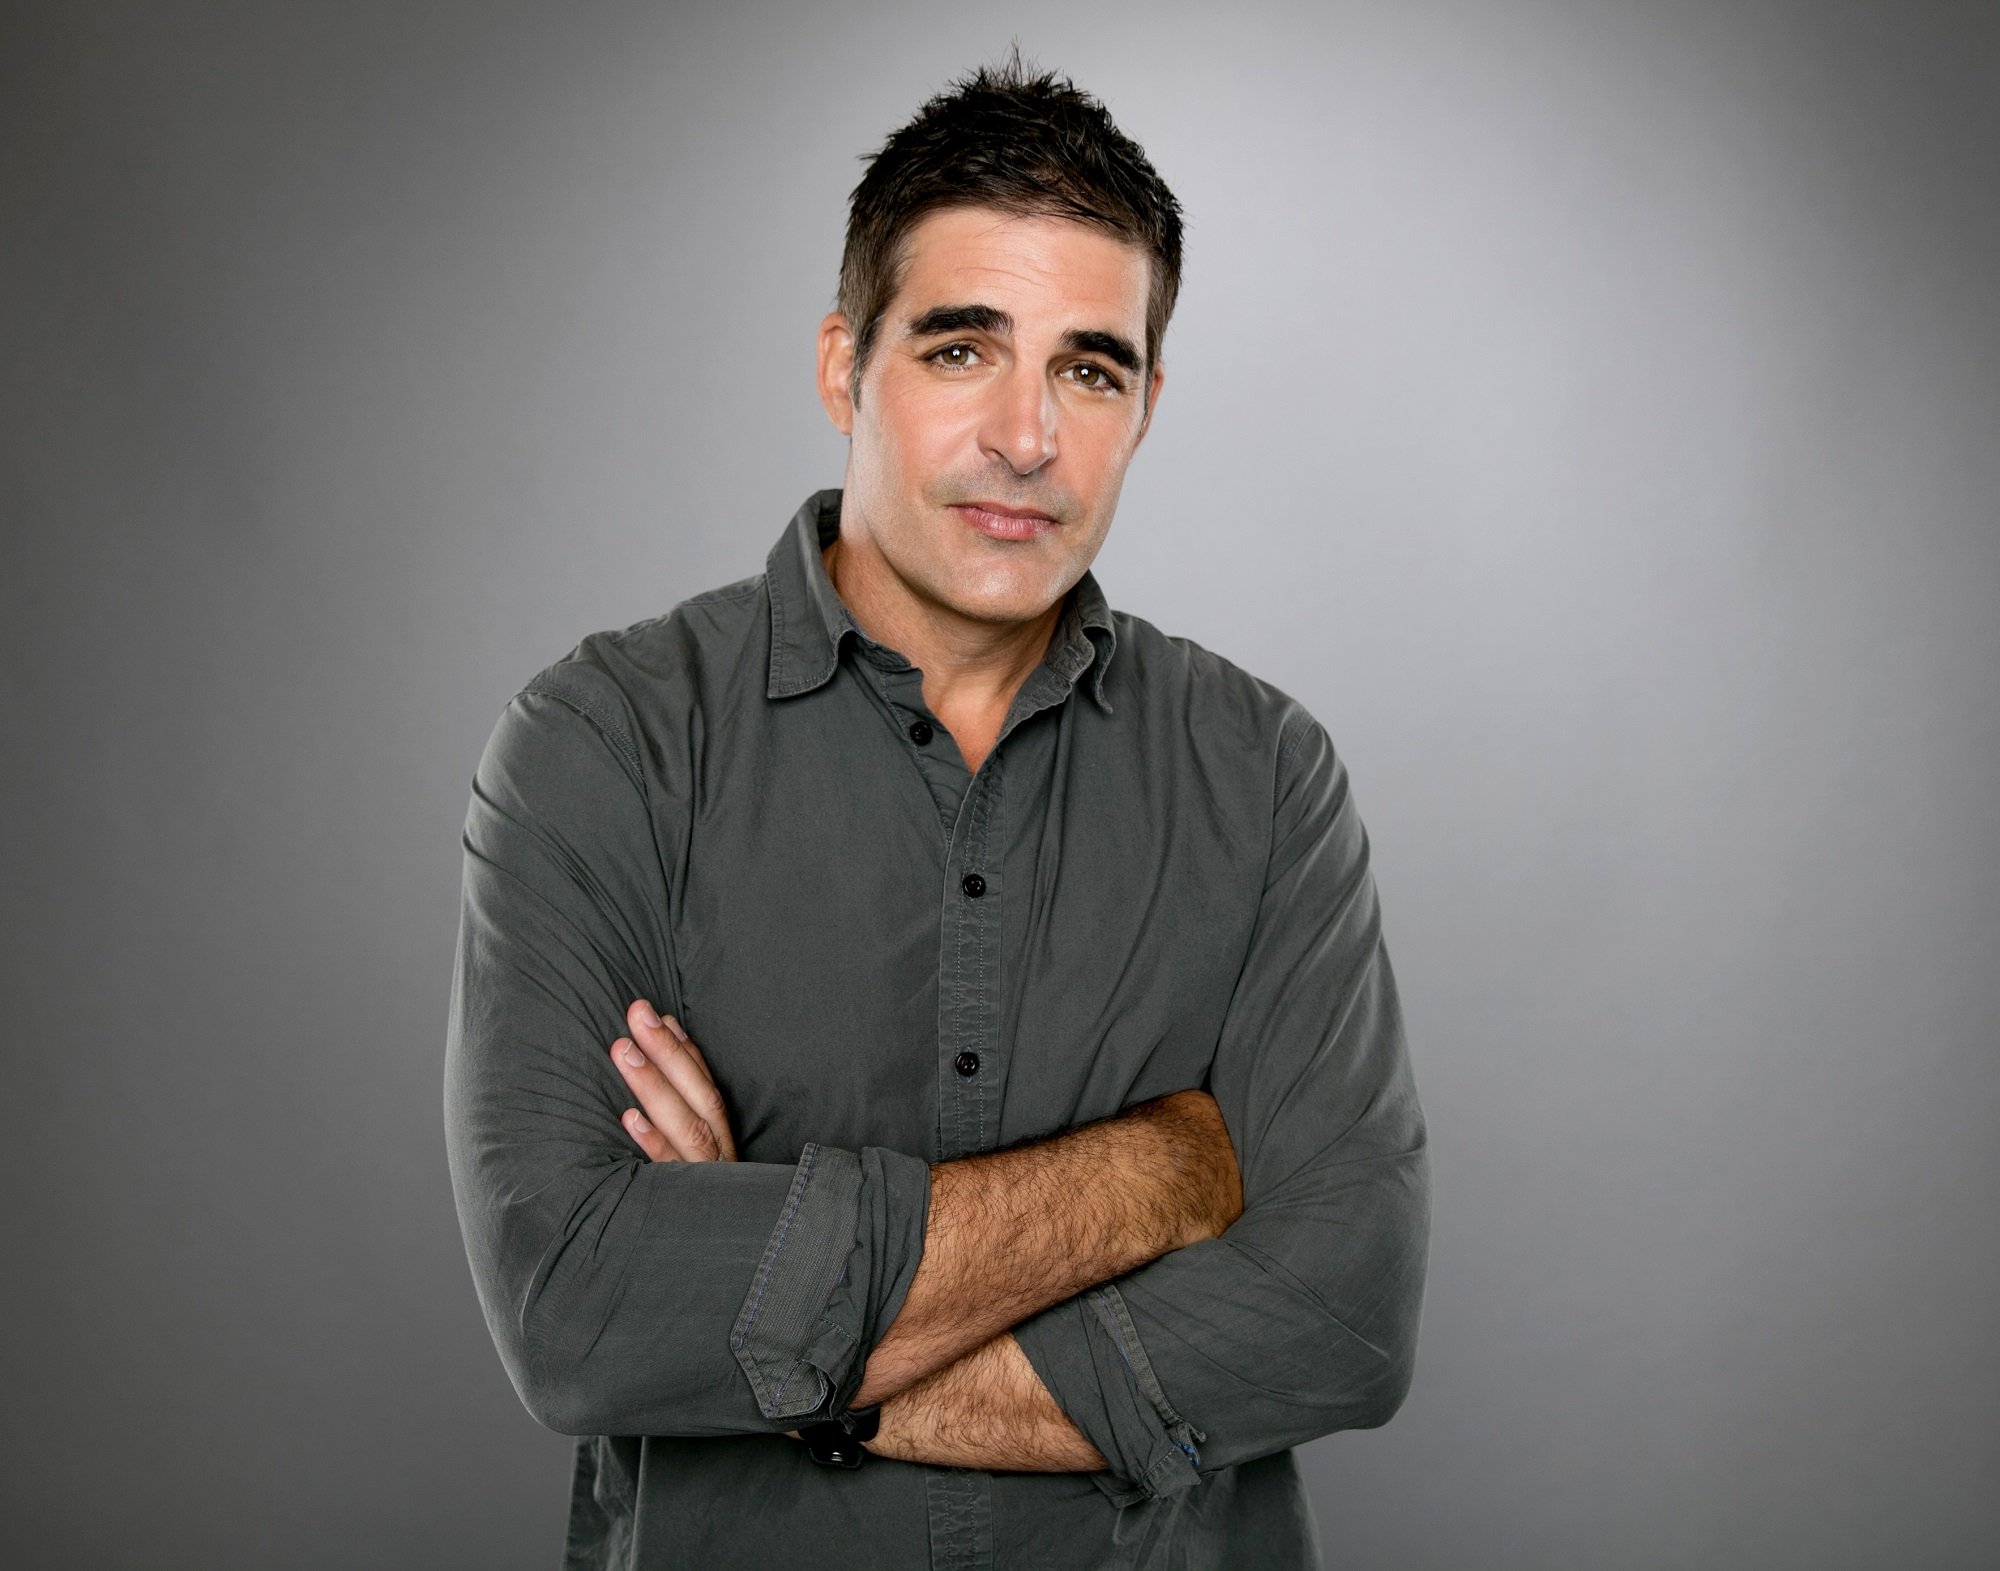 Days of Our Lives speculation focuses on Rafe, pictured here in a long grey shirt against a grey background